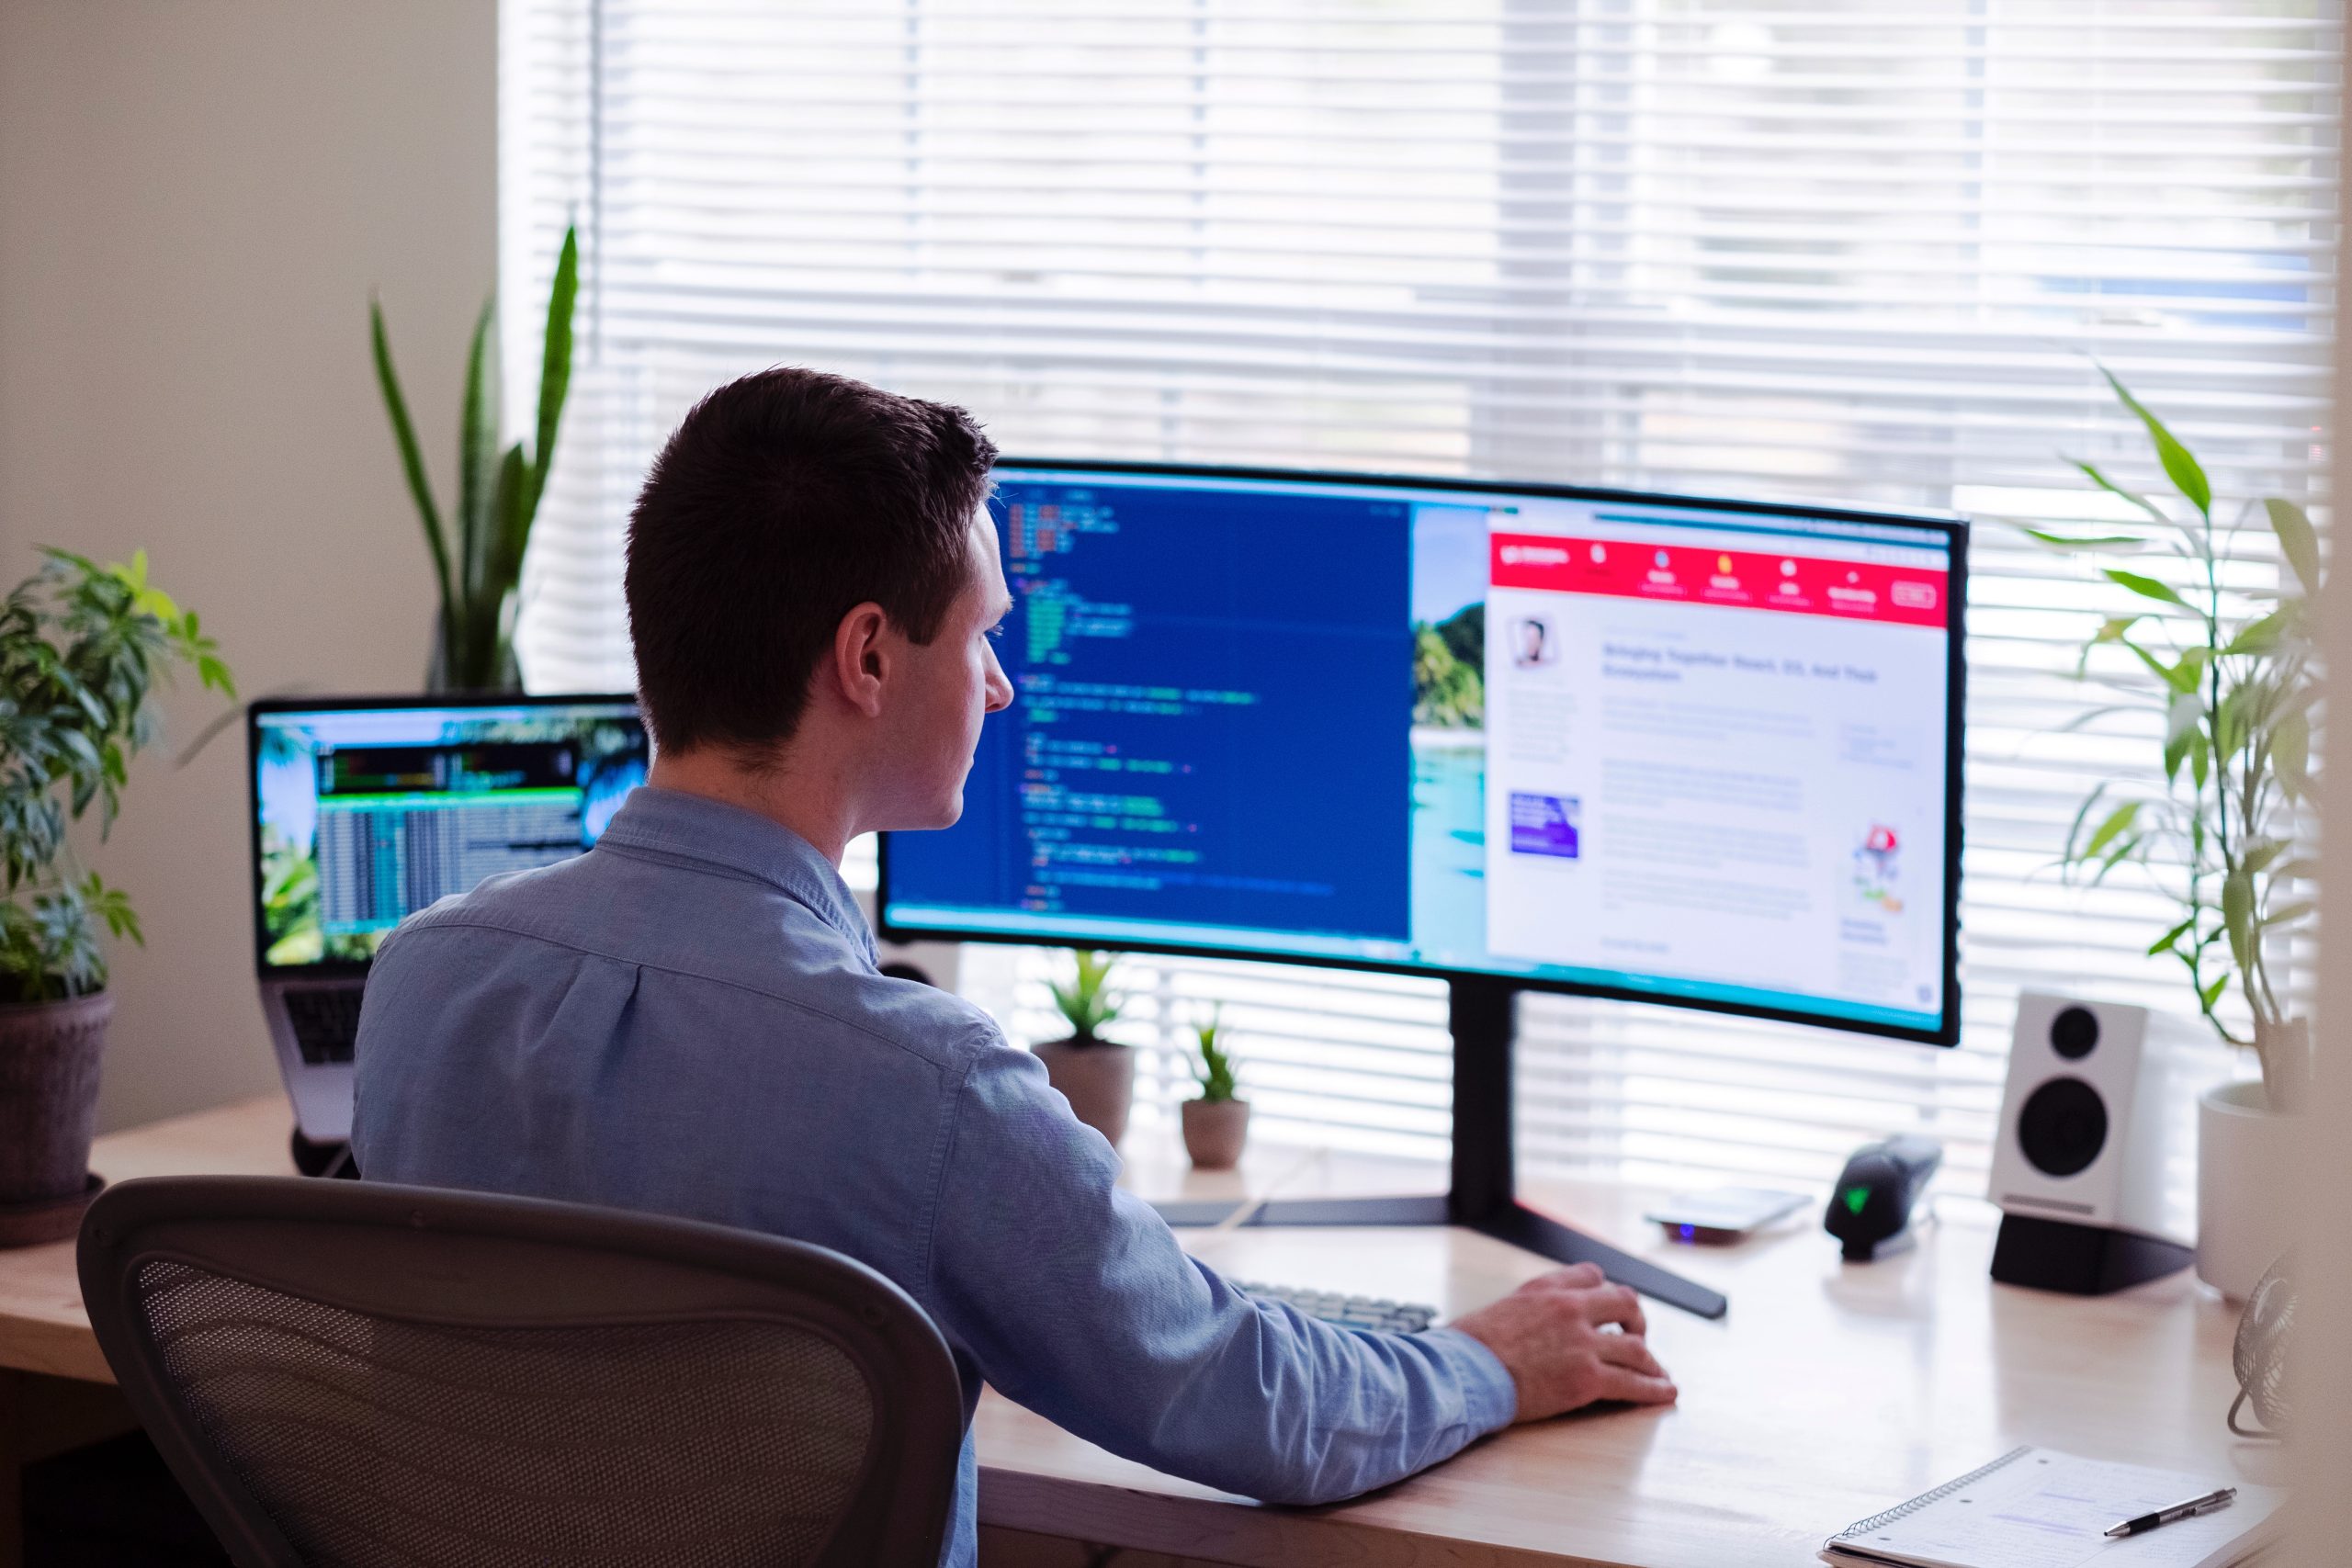 remote worker at desk with multiple screens - IT Asset Management